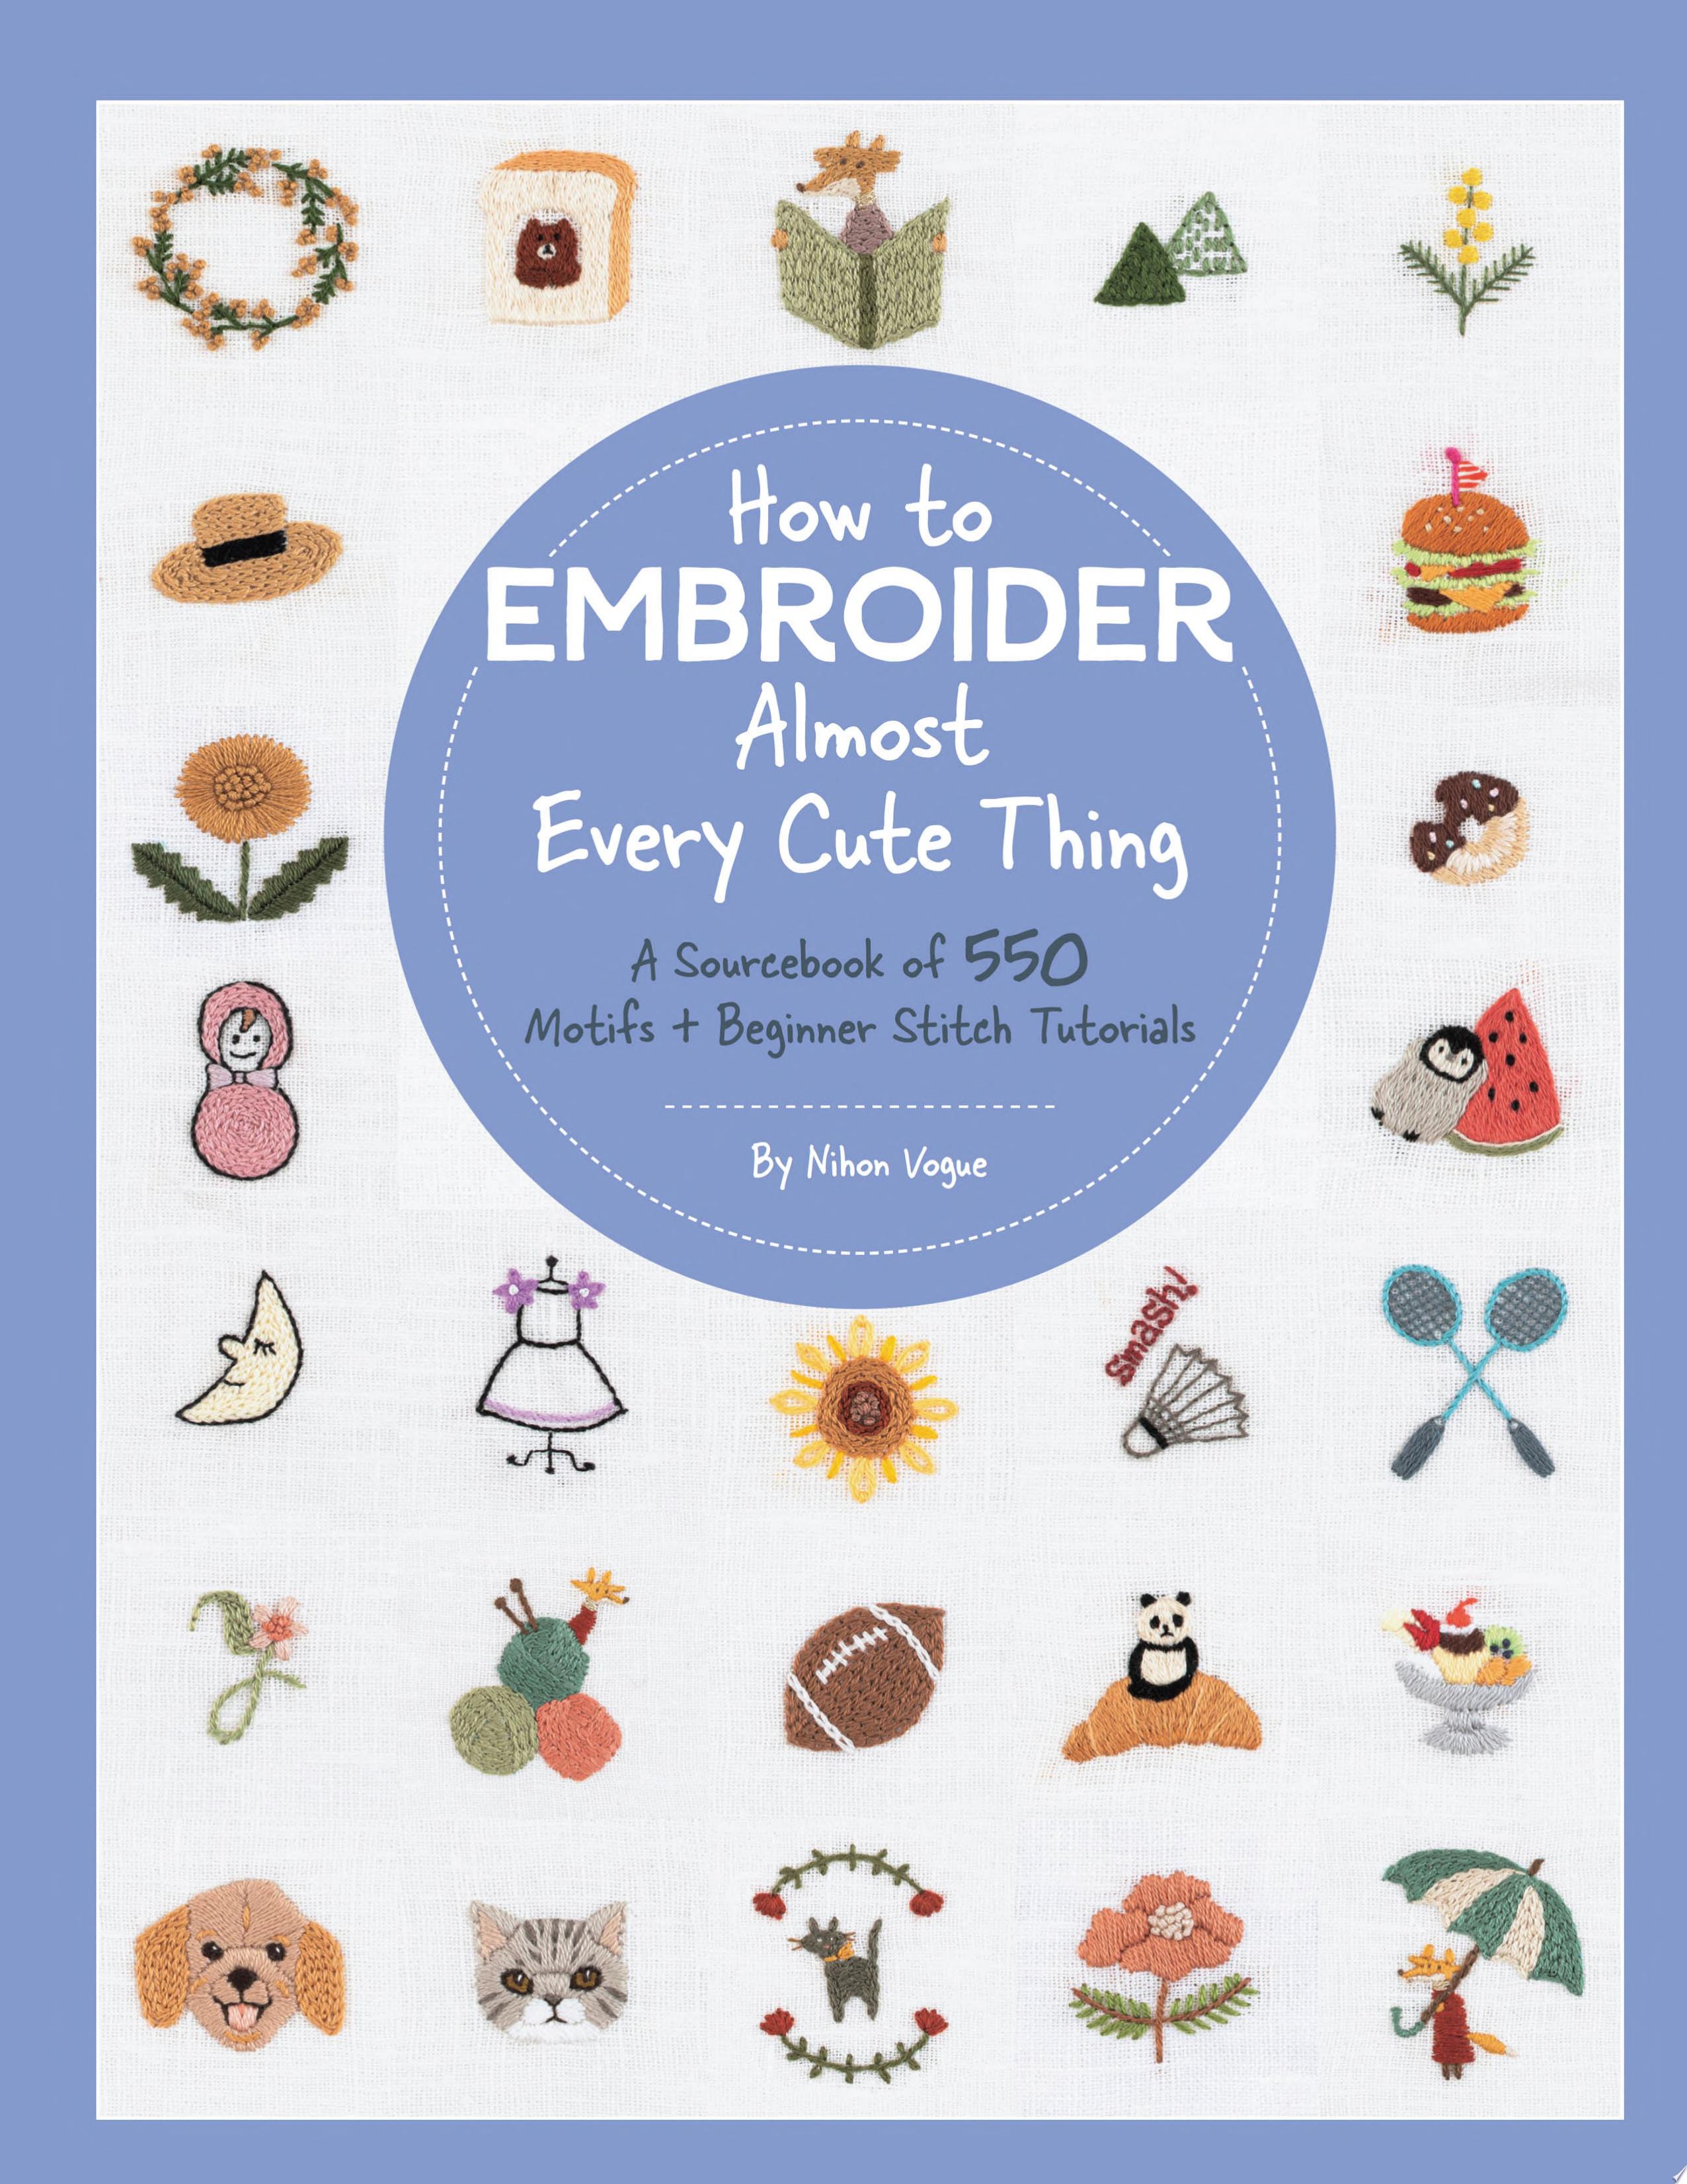 Image for "How to Embroider Almost Every Cute Thing"